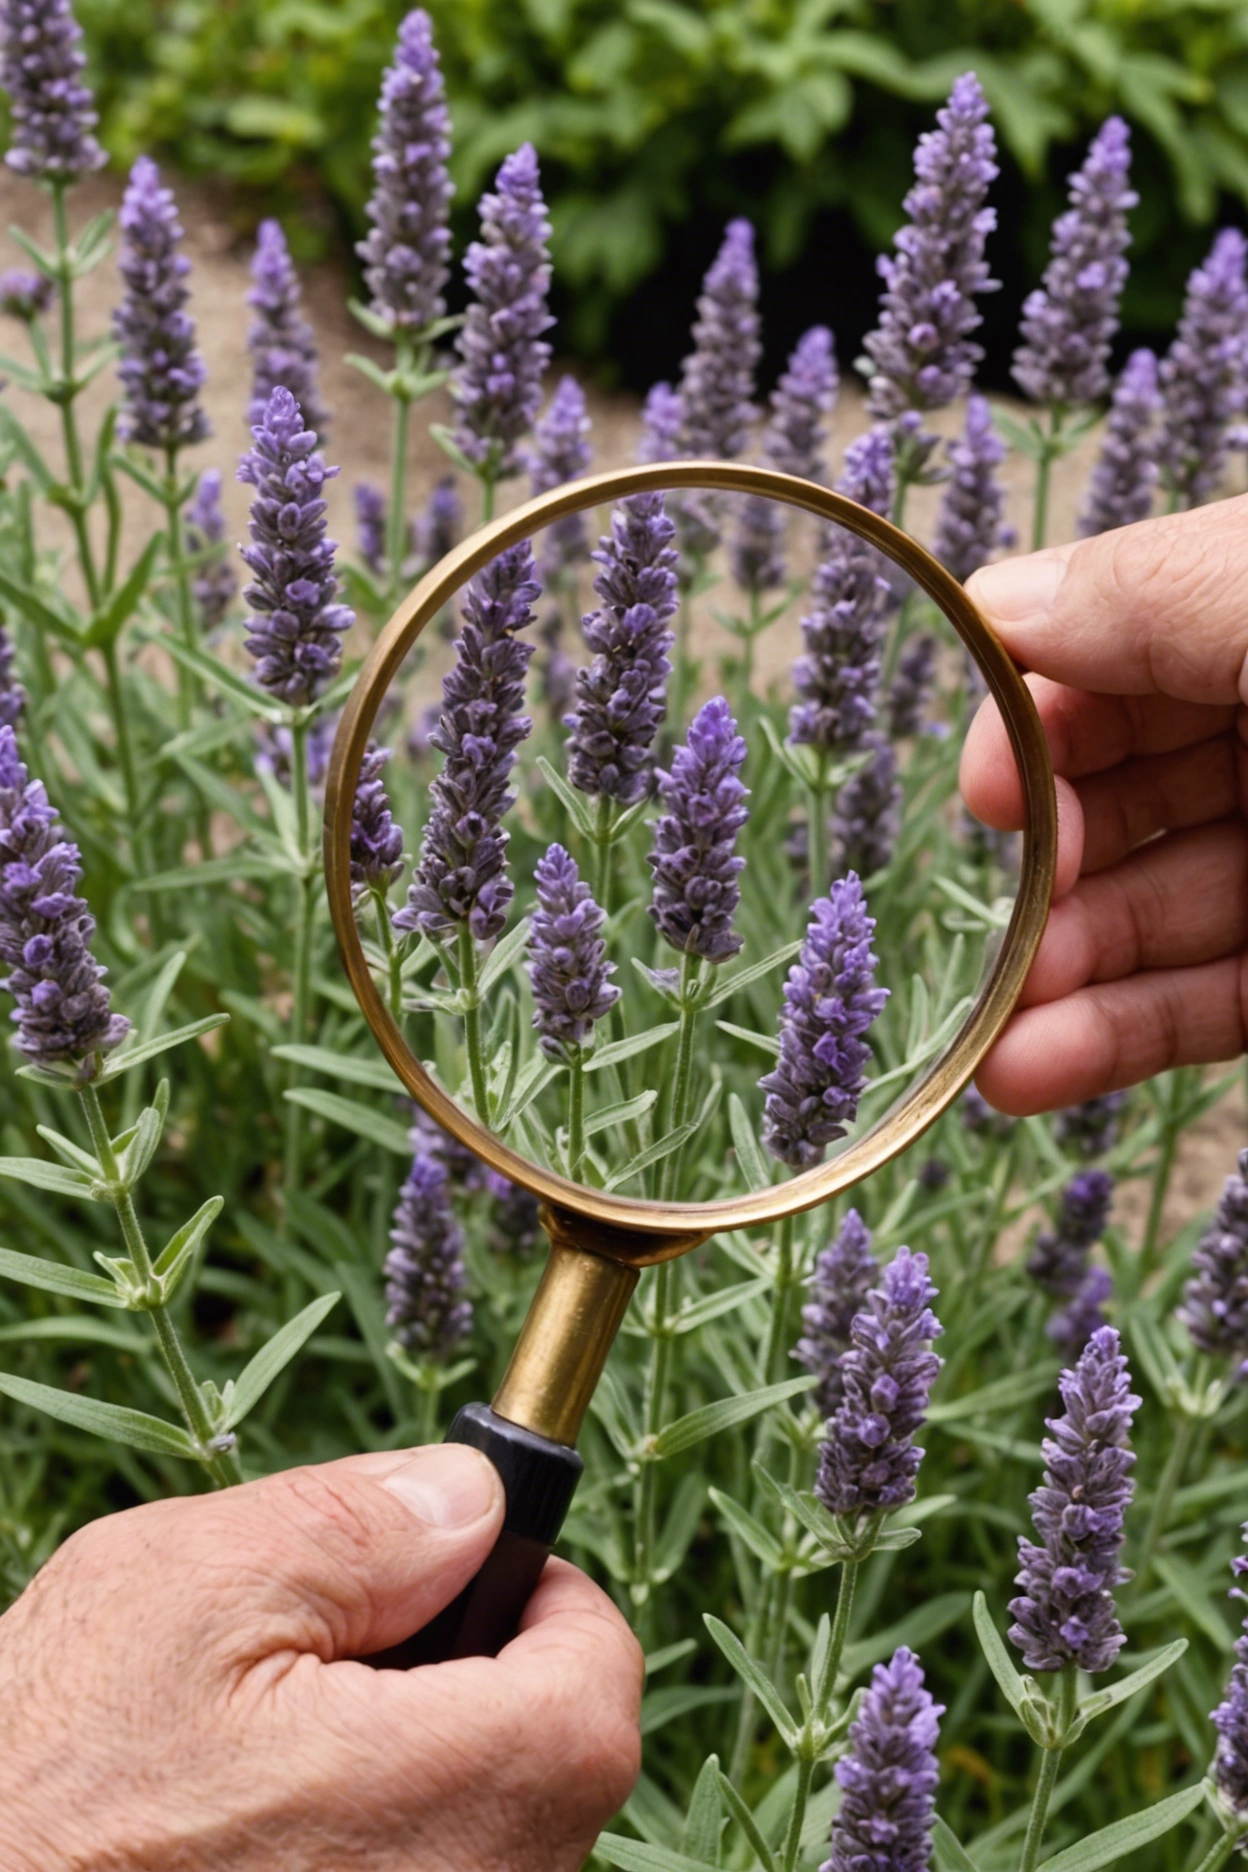 "Gardener's hand holding a magnifying glass over brown lavender flowers, with healthy purple blooms and a plant disease guidebook in the background."